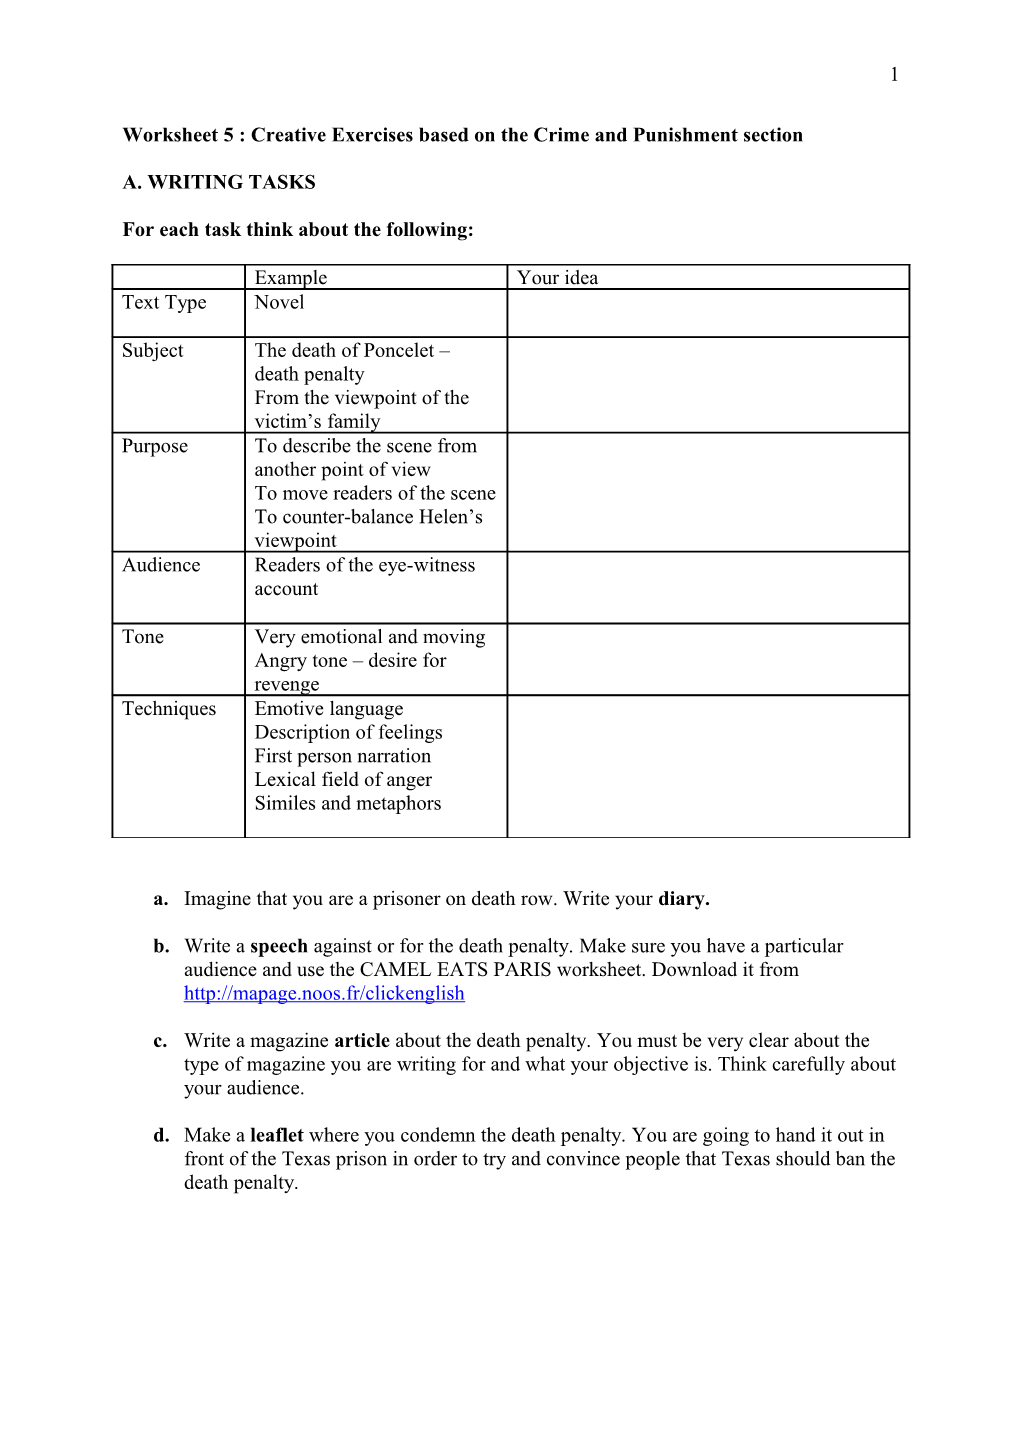 Worksheet 5 : Creative Exercises Based on the Crime and Punishment Section